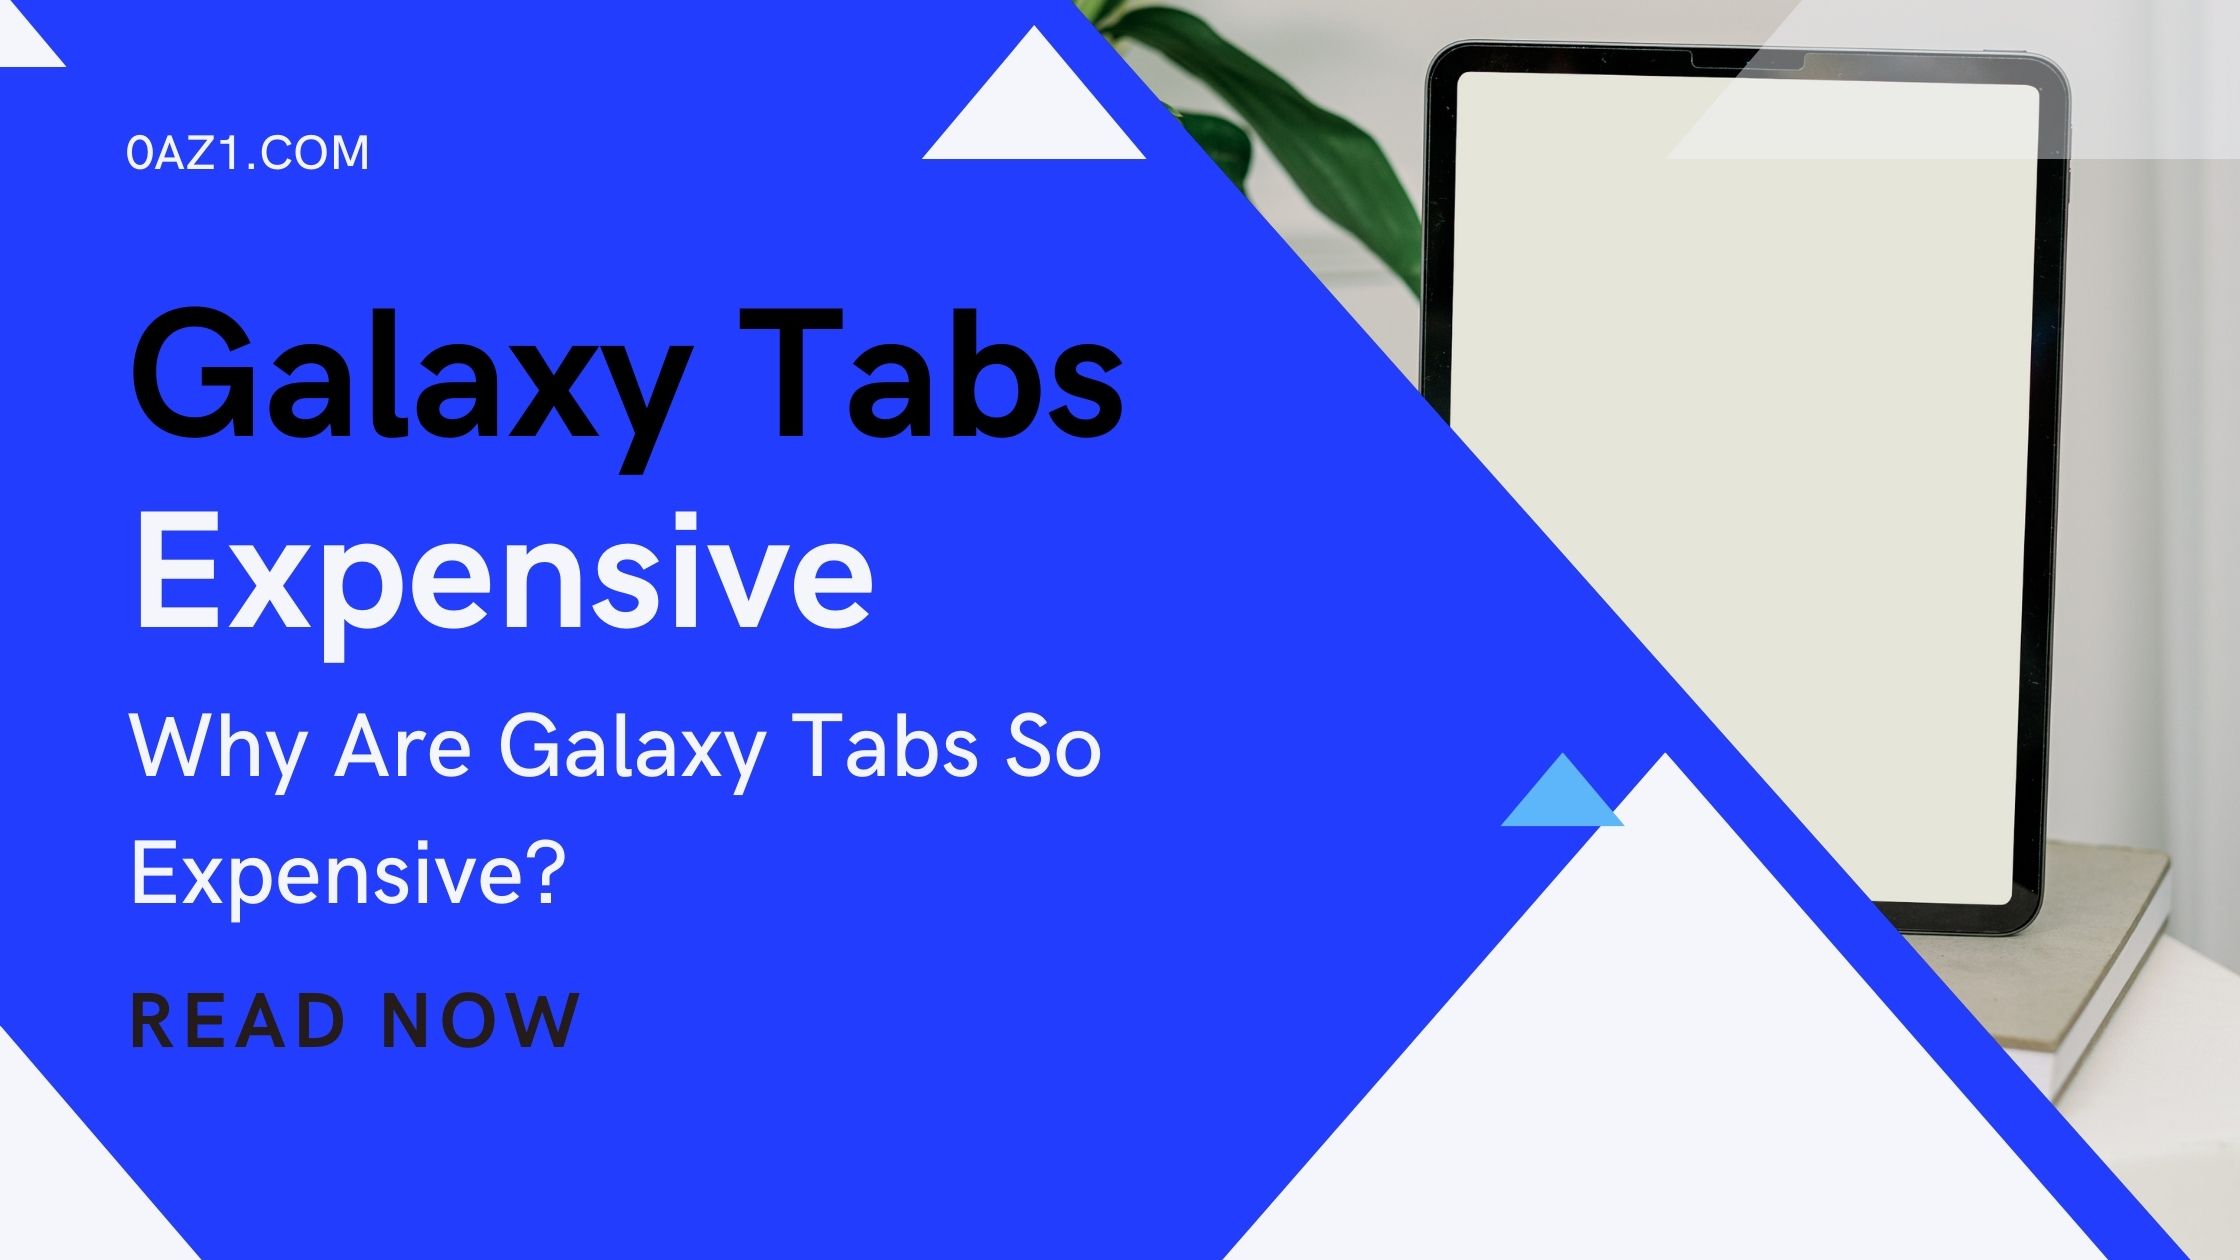 Why Are Galaxy Tabs So Expensive?